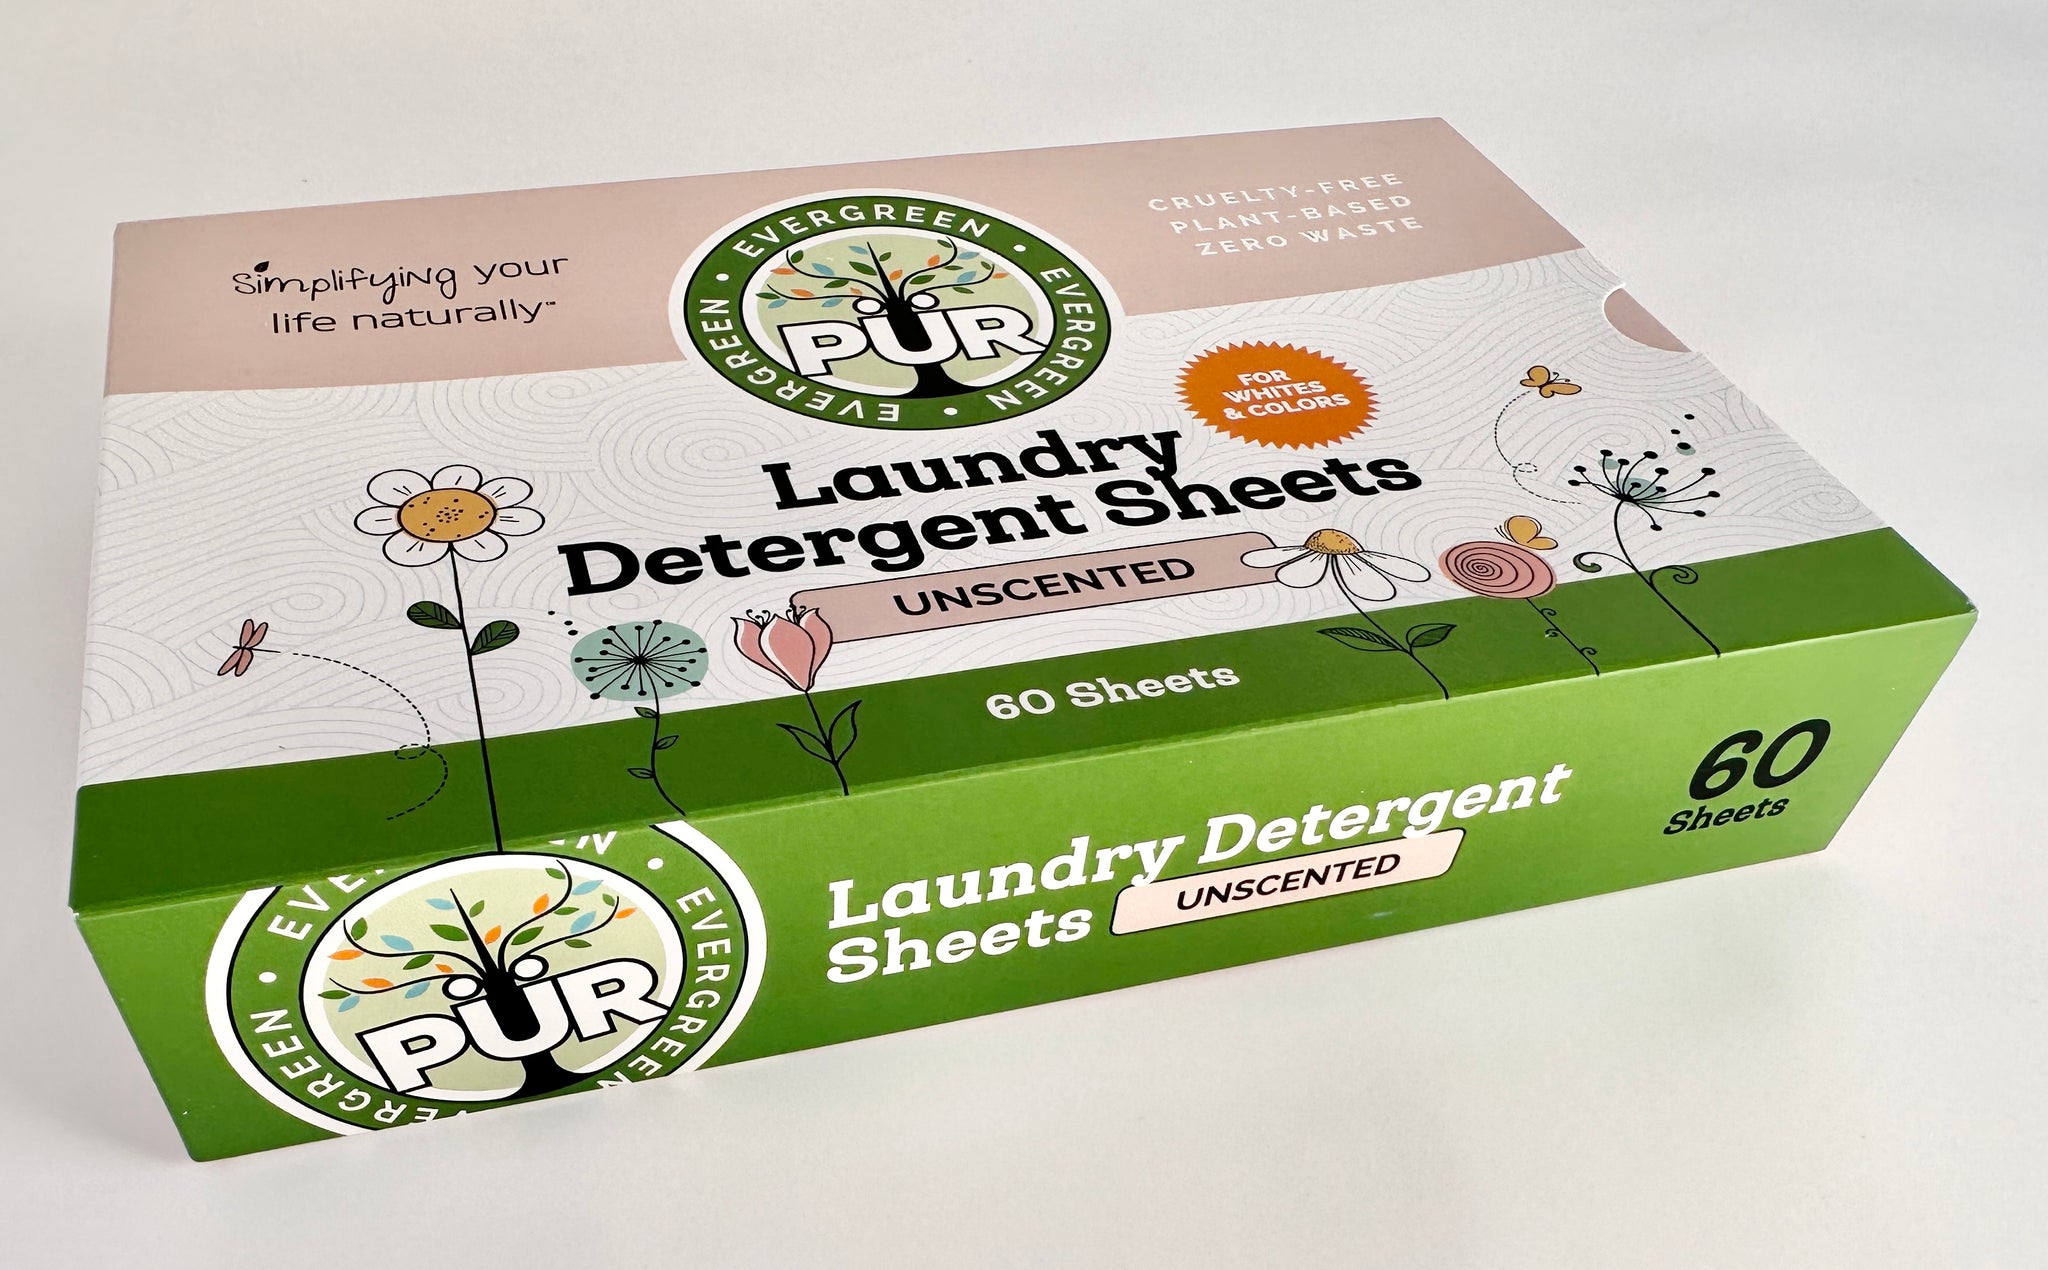 Laundry Detergent Sheets - Unscented